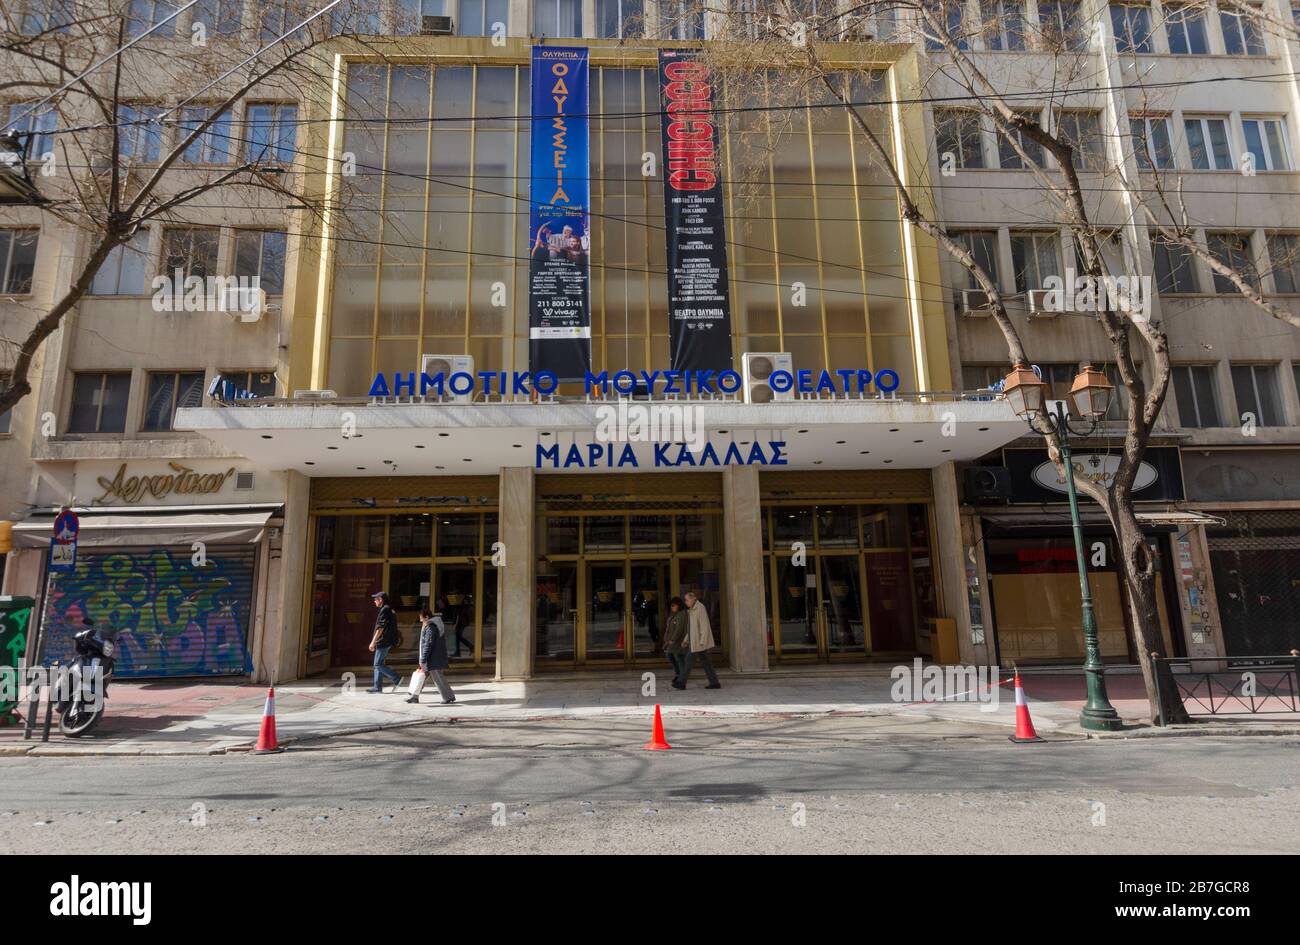 ATHENS, GREECE - 03 Mar 2020 - Exterior view of the Olympia Munipicial Music Theatre Maria Callas in Akadimias street in central Athens Greece Stock Photo